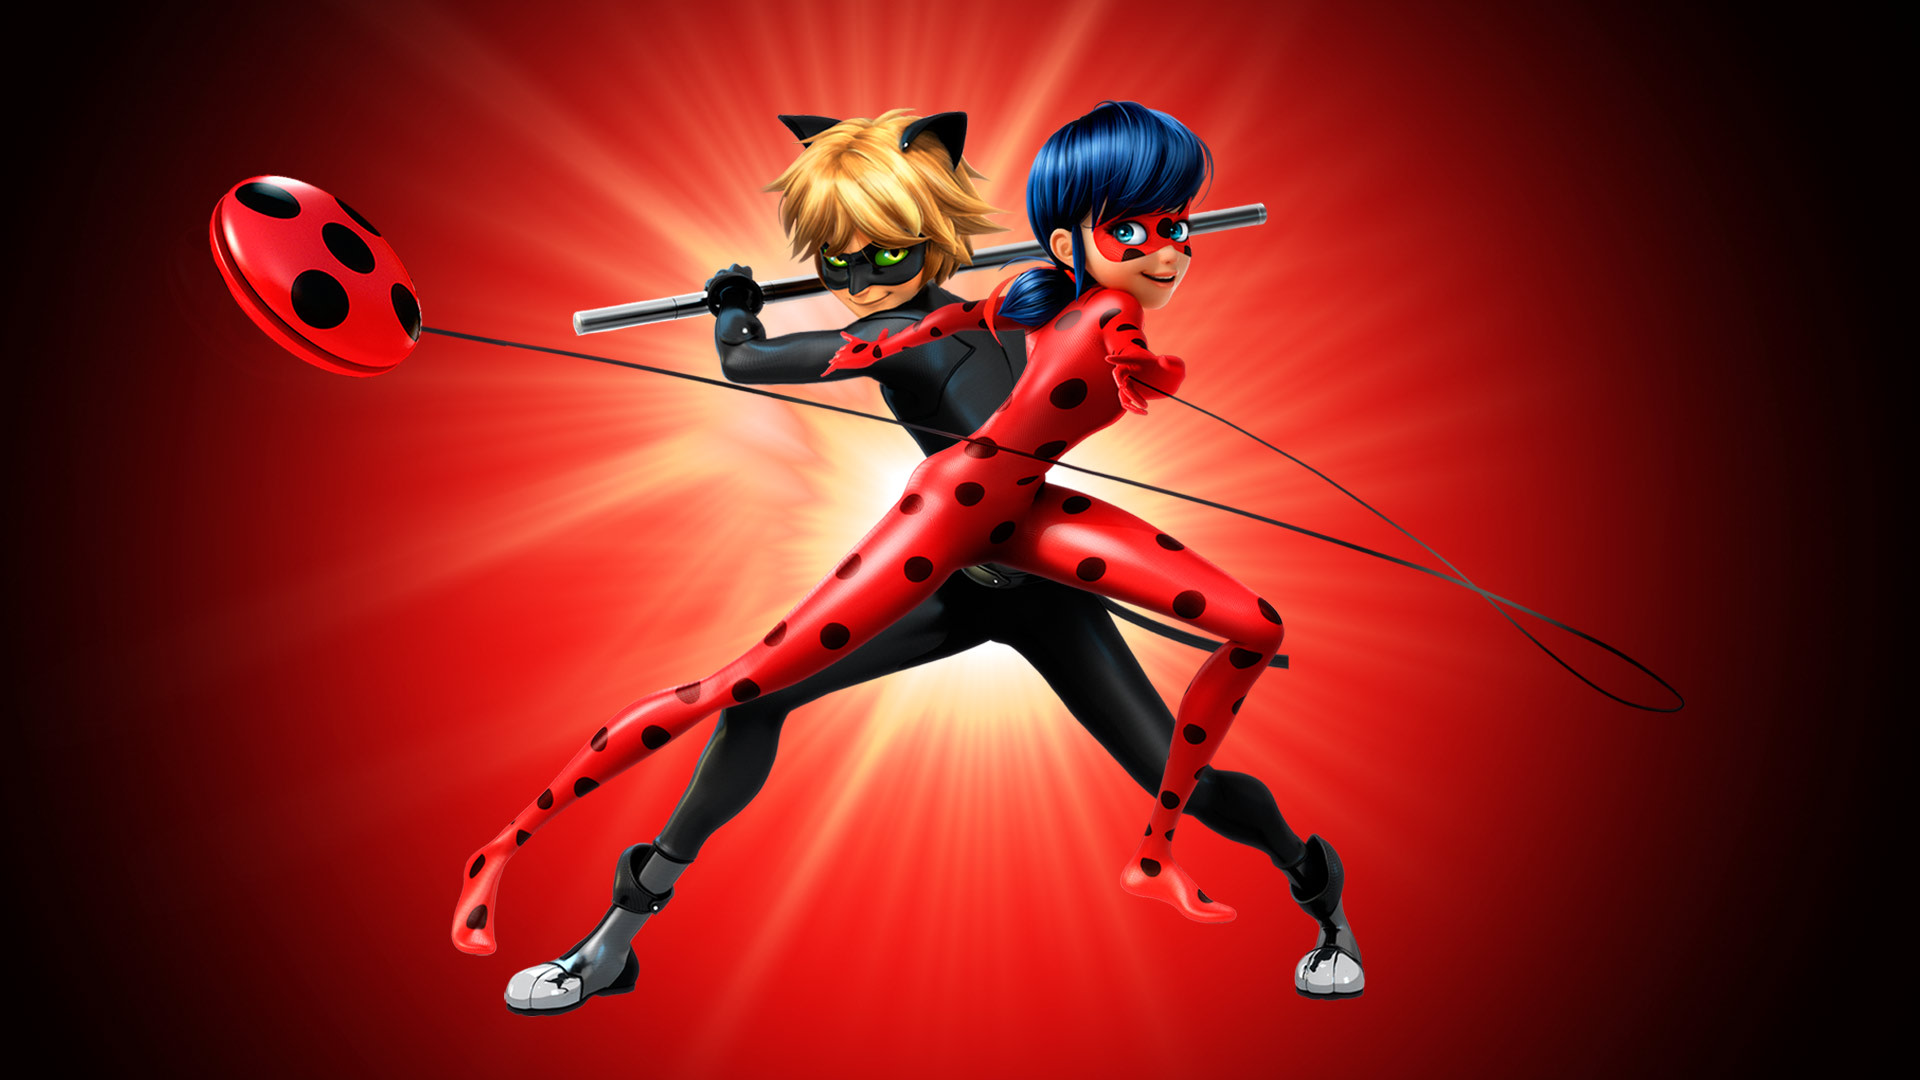 Miraculous: Tales of Ladybug & Cat Noir: Where to Watch & Stream